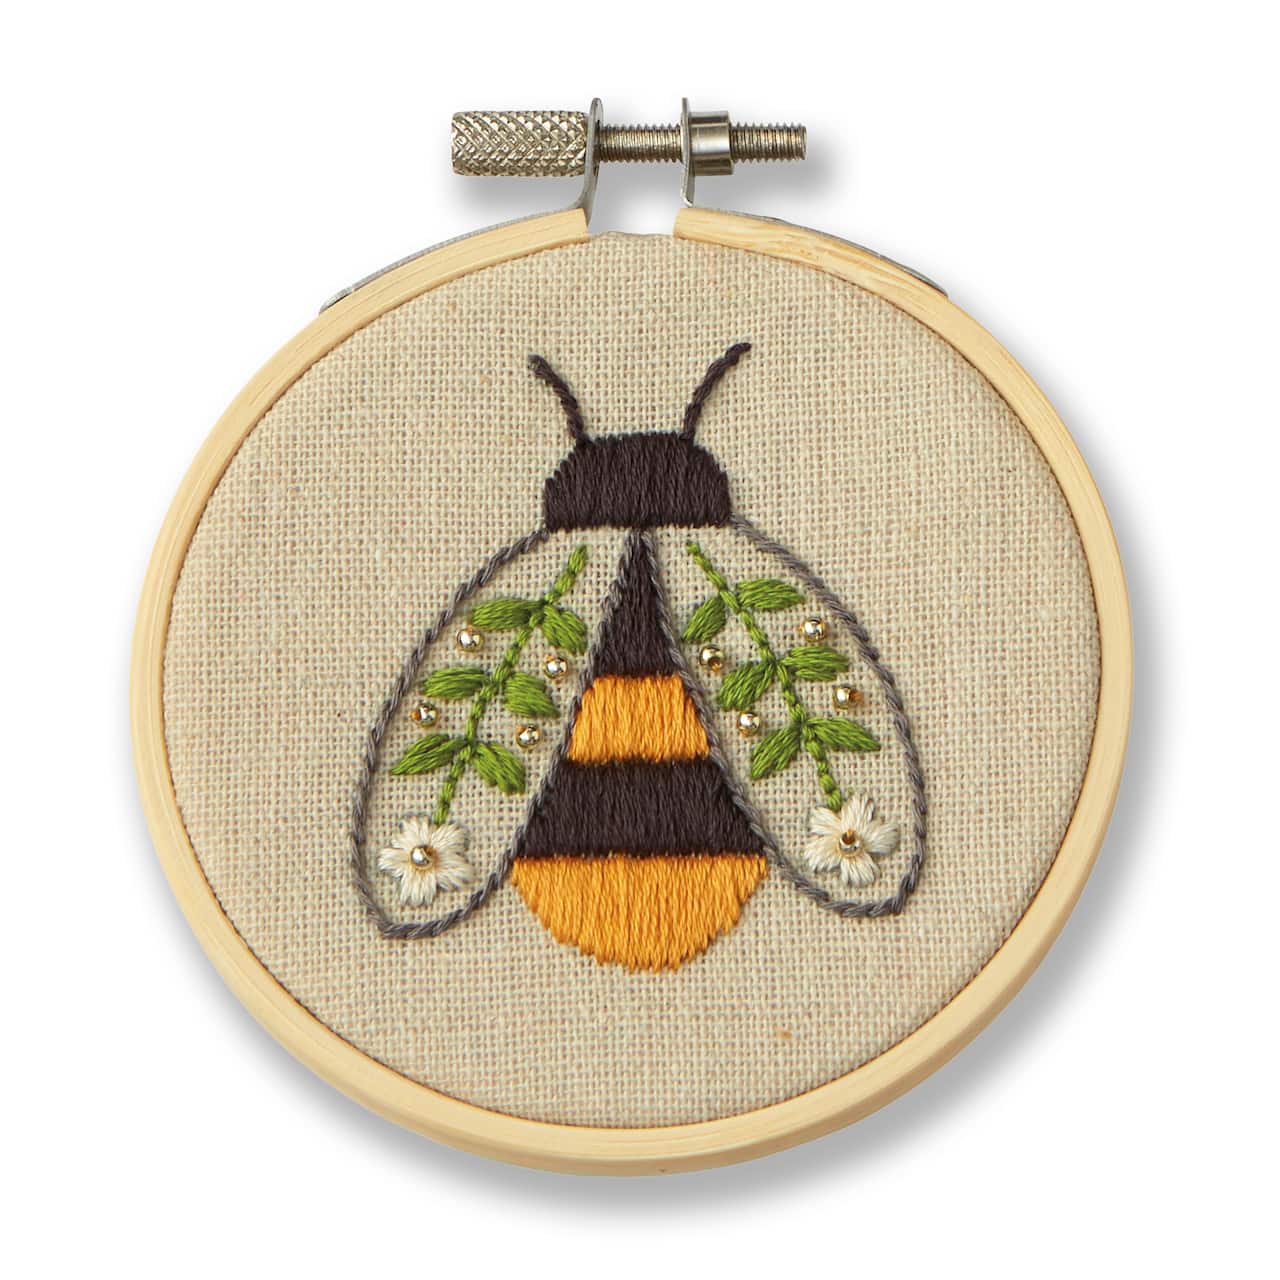 Bumble Bee Embroidery Kit by Loops & Threads®